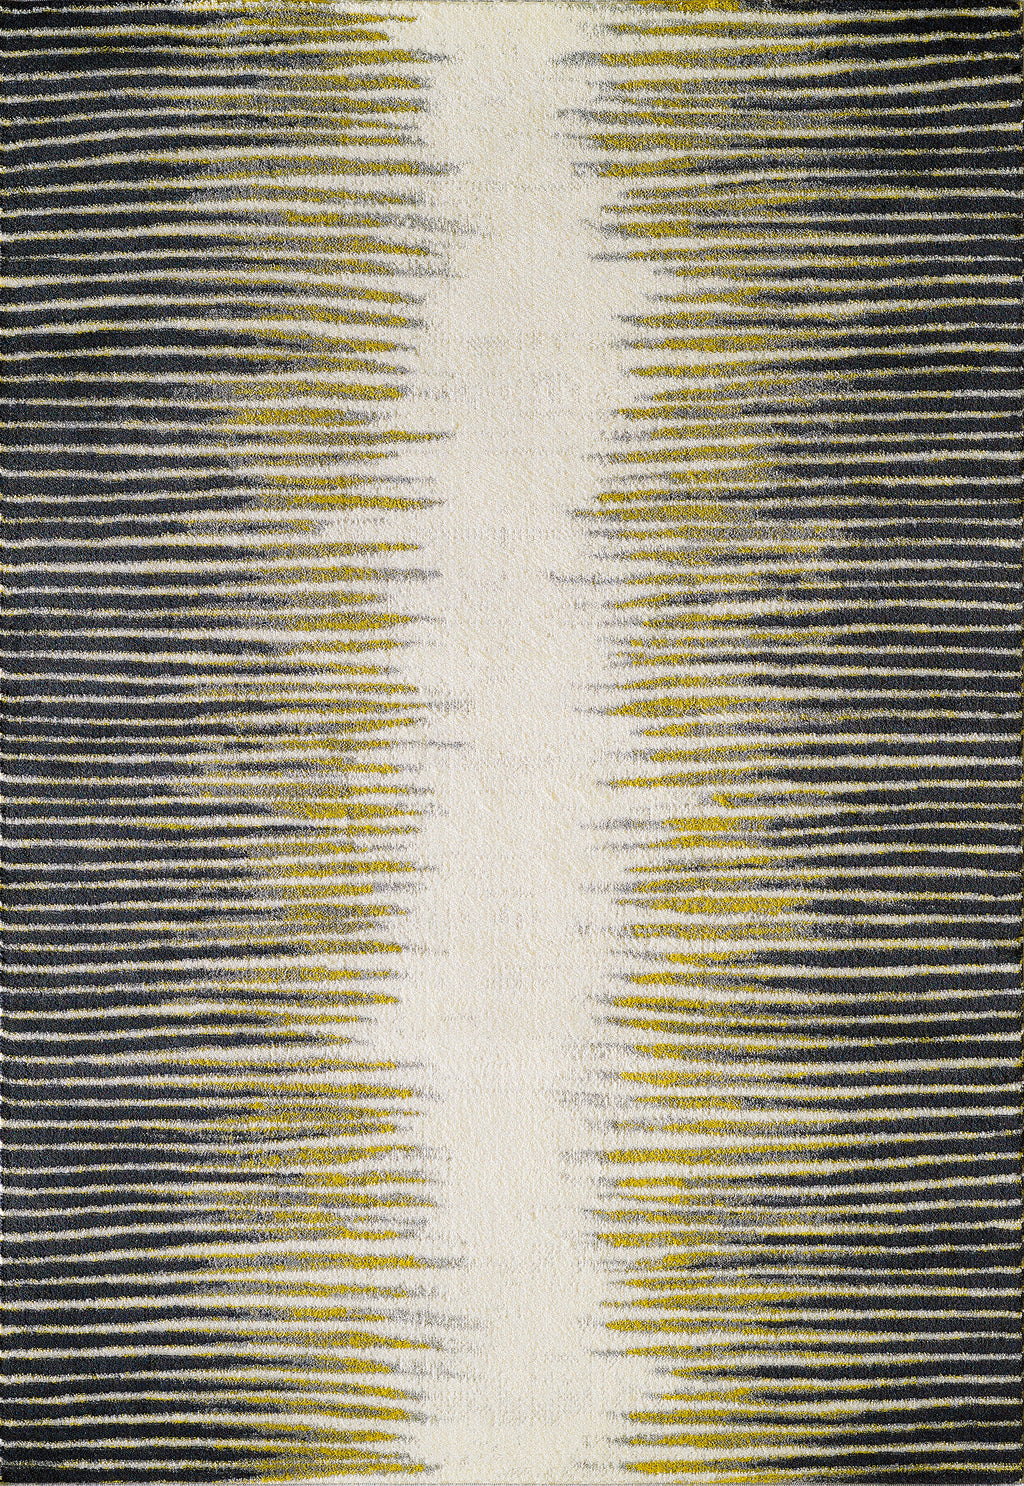 Abstract Striped Yellow and Grey